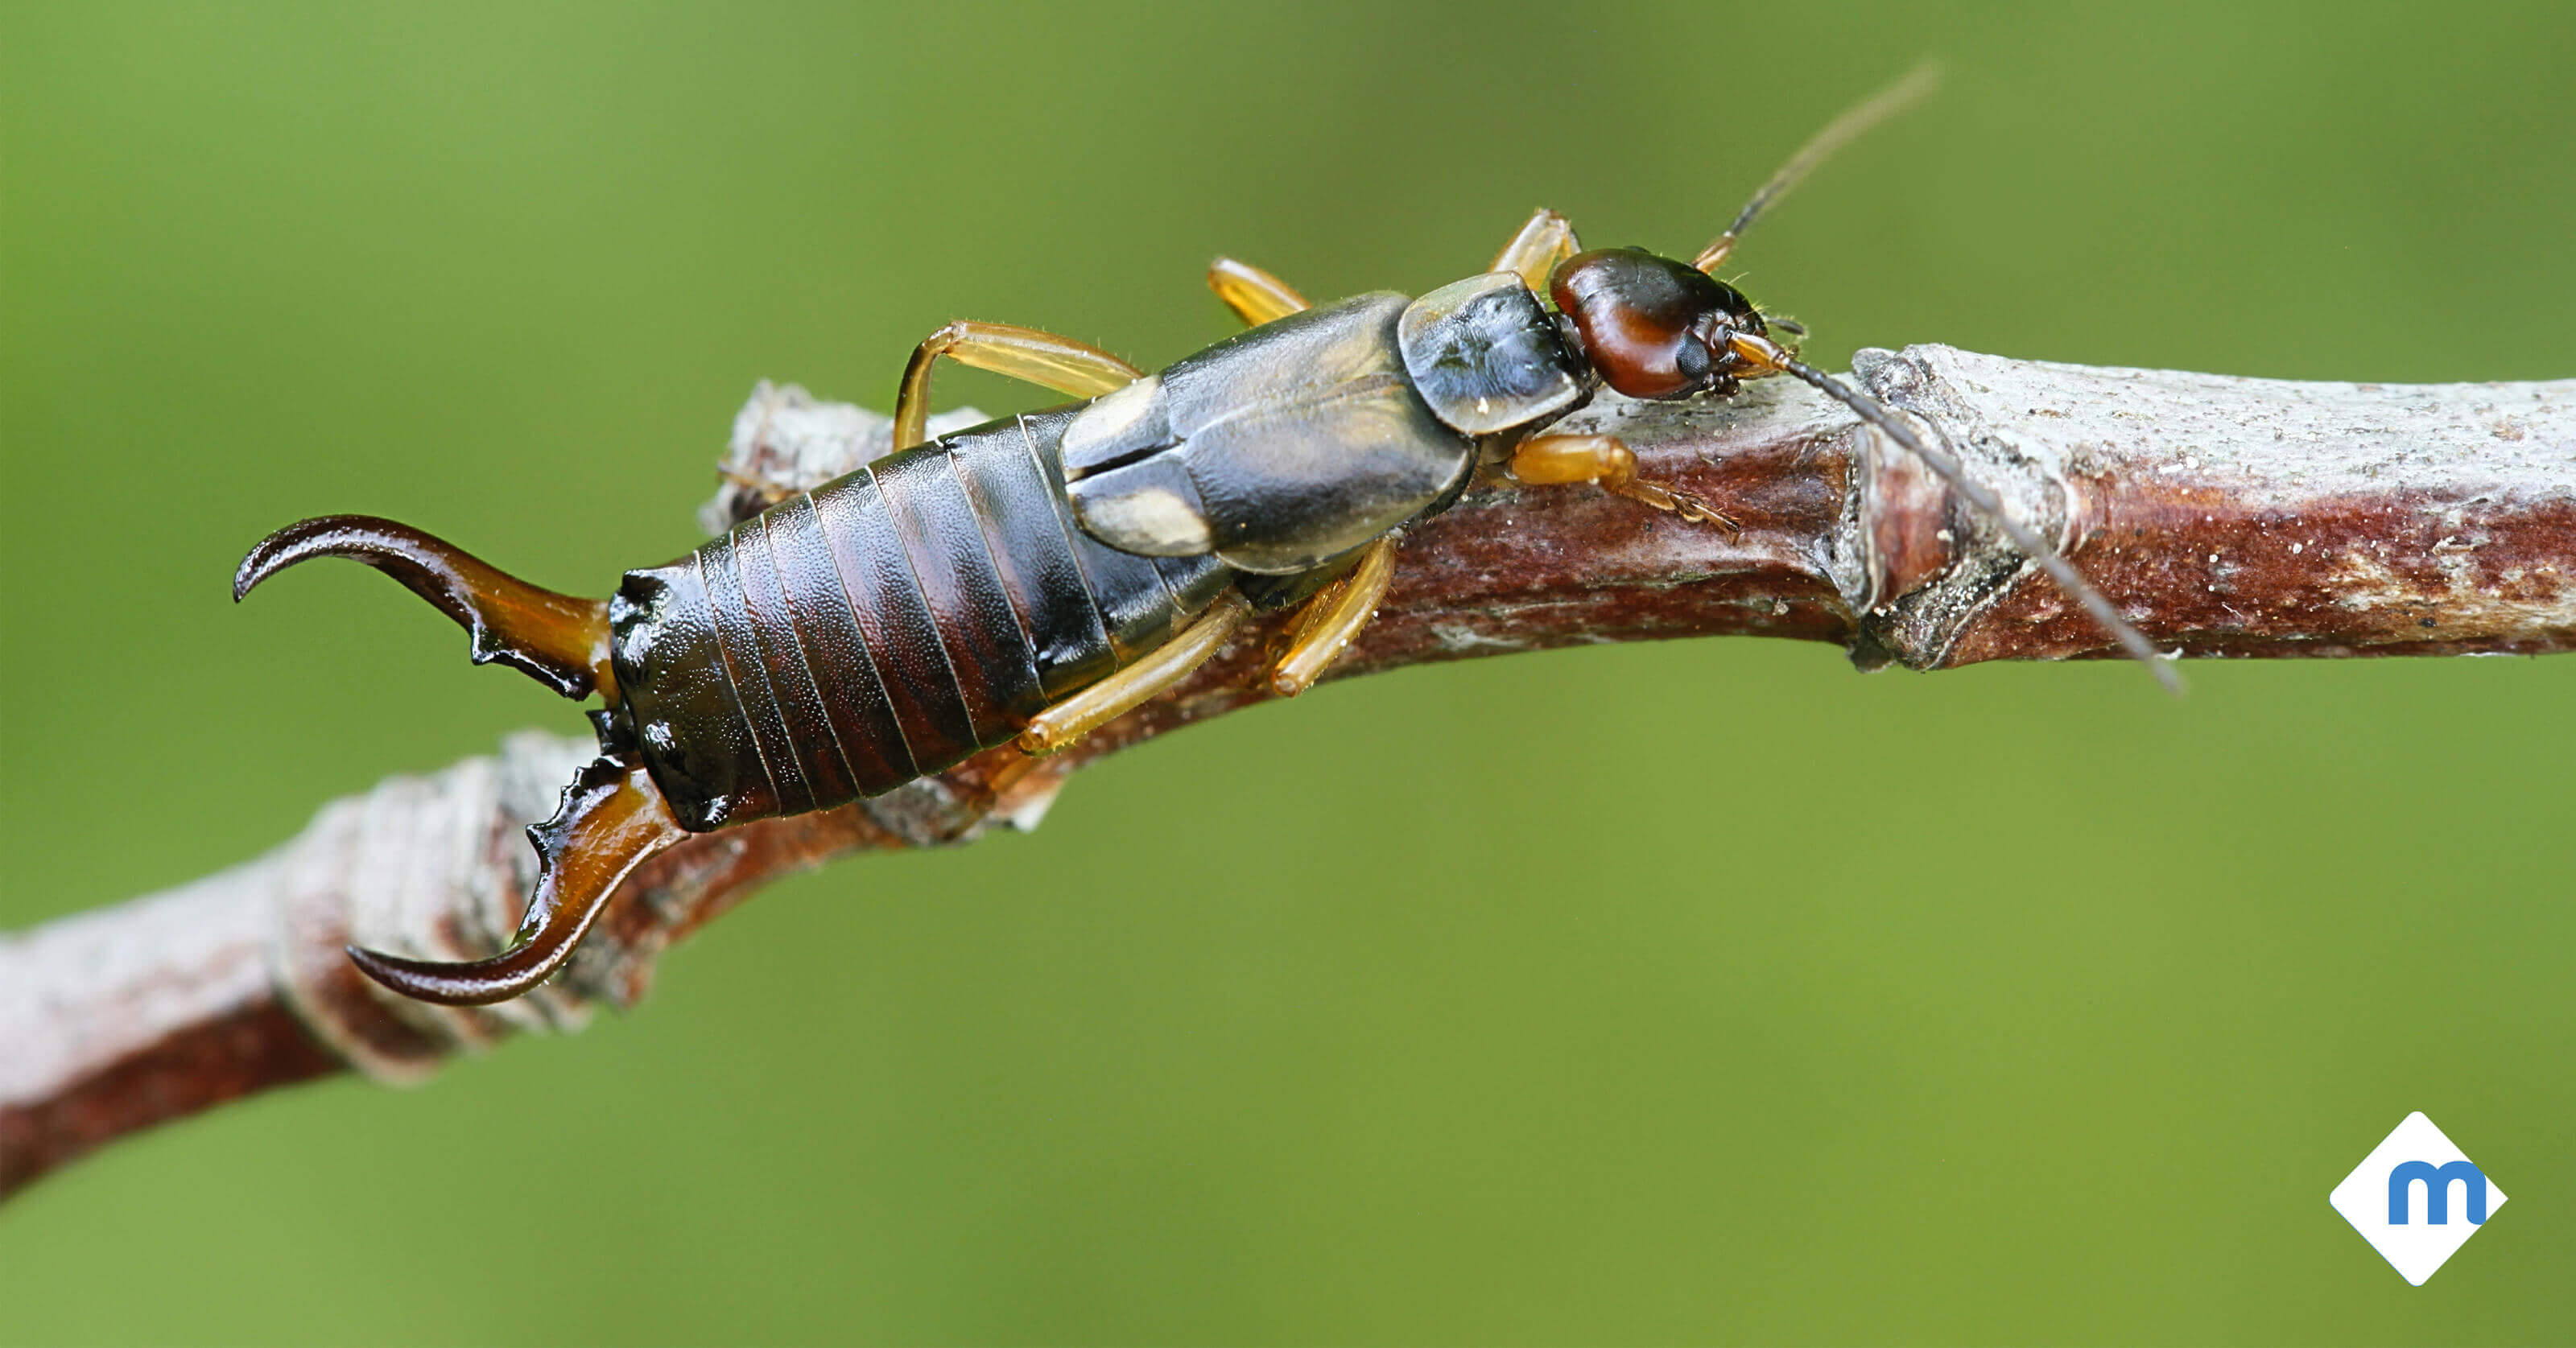 Earwigs: Are They as Bad as They Sound?